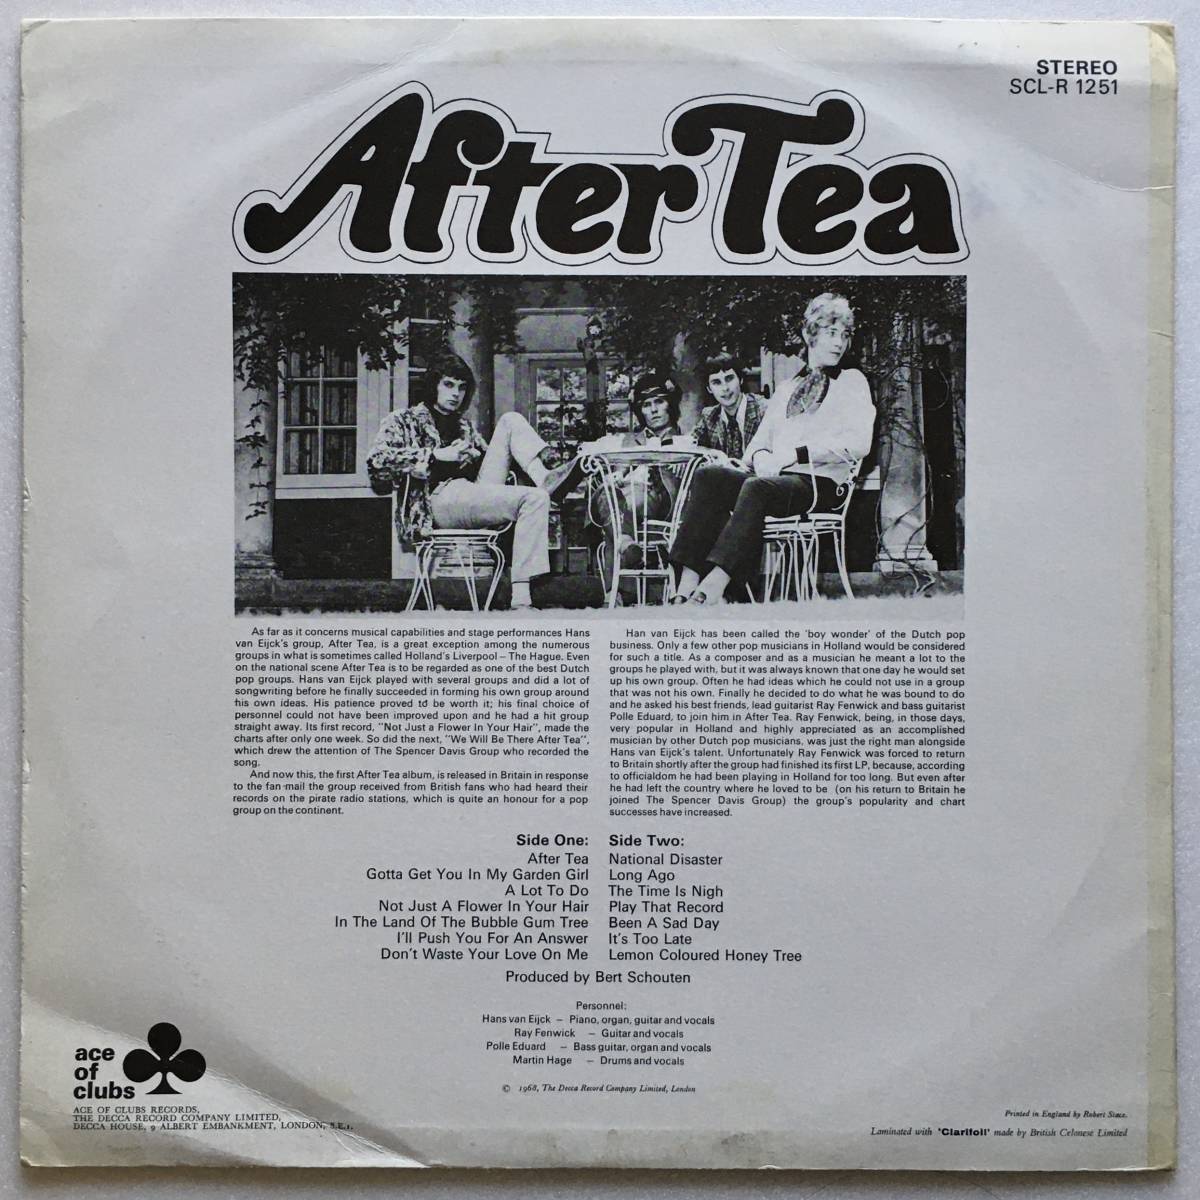 AFTER TEA「AFTER TEA」UK ORIGINAL ACE OF CLUBS SCL-R 1251 '68 DUTCH BEAT PSYCHEDELIC ROCK LAMINATED SLEEVEの画像2